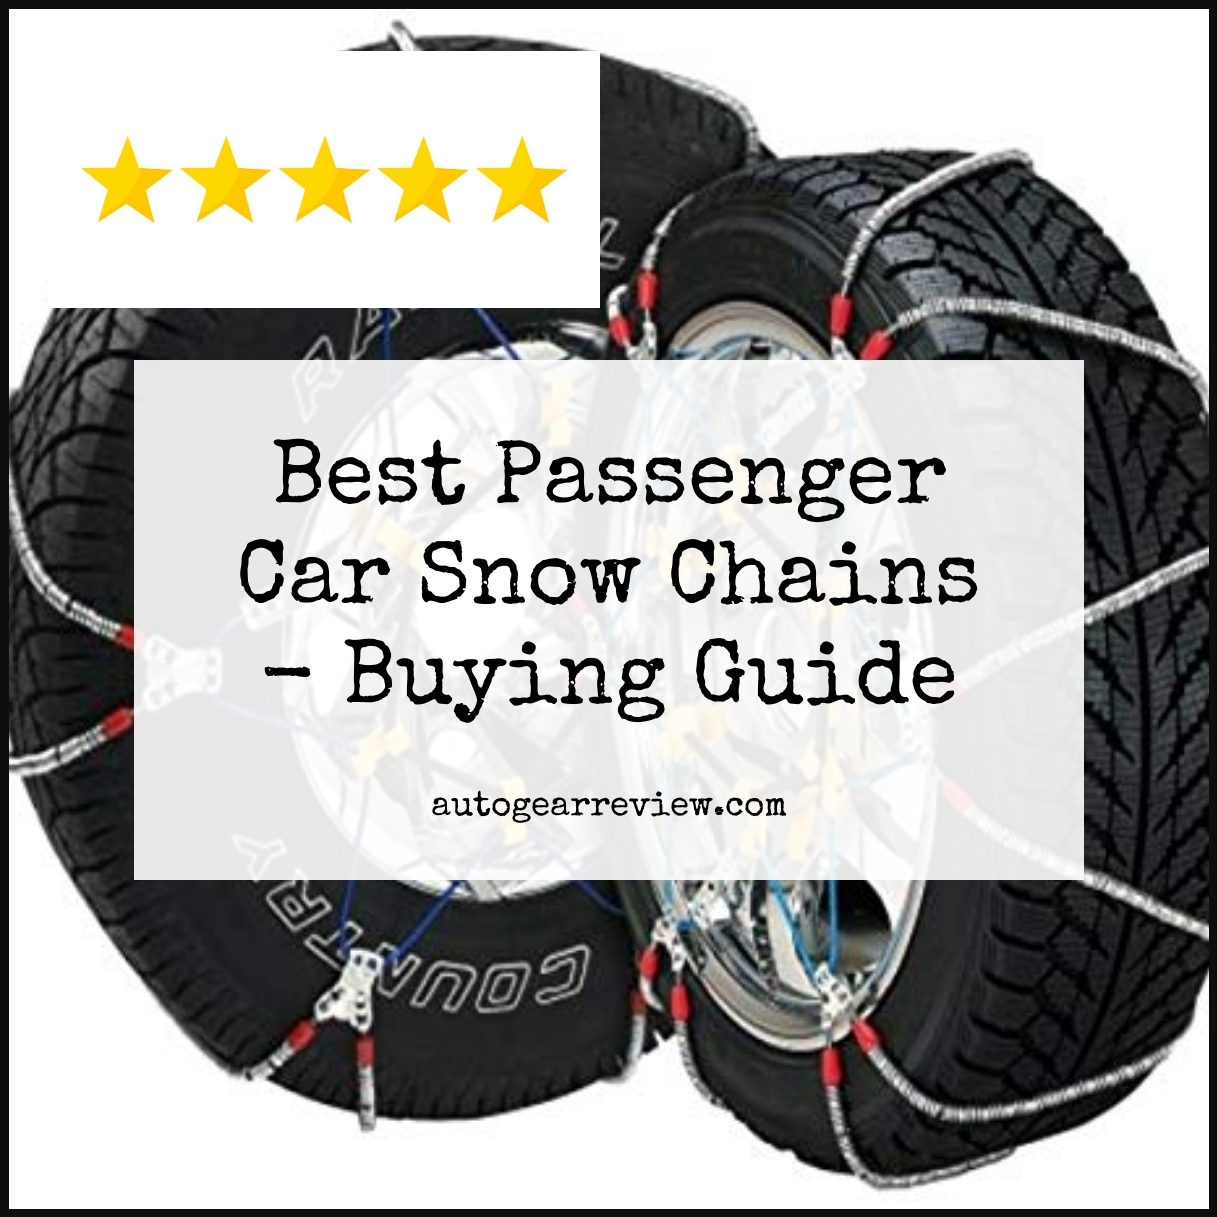 Best Passenger Car Snow Chains - Buying Guide